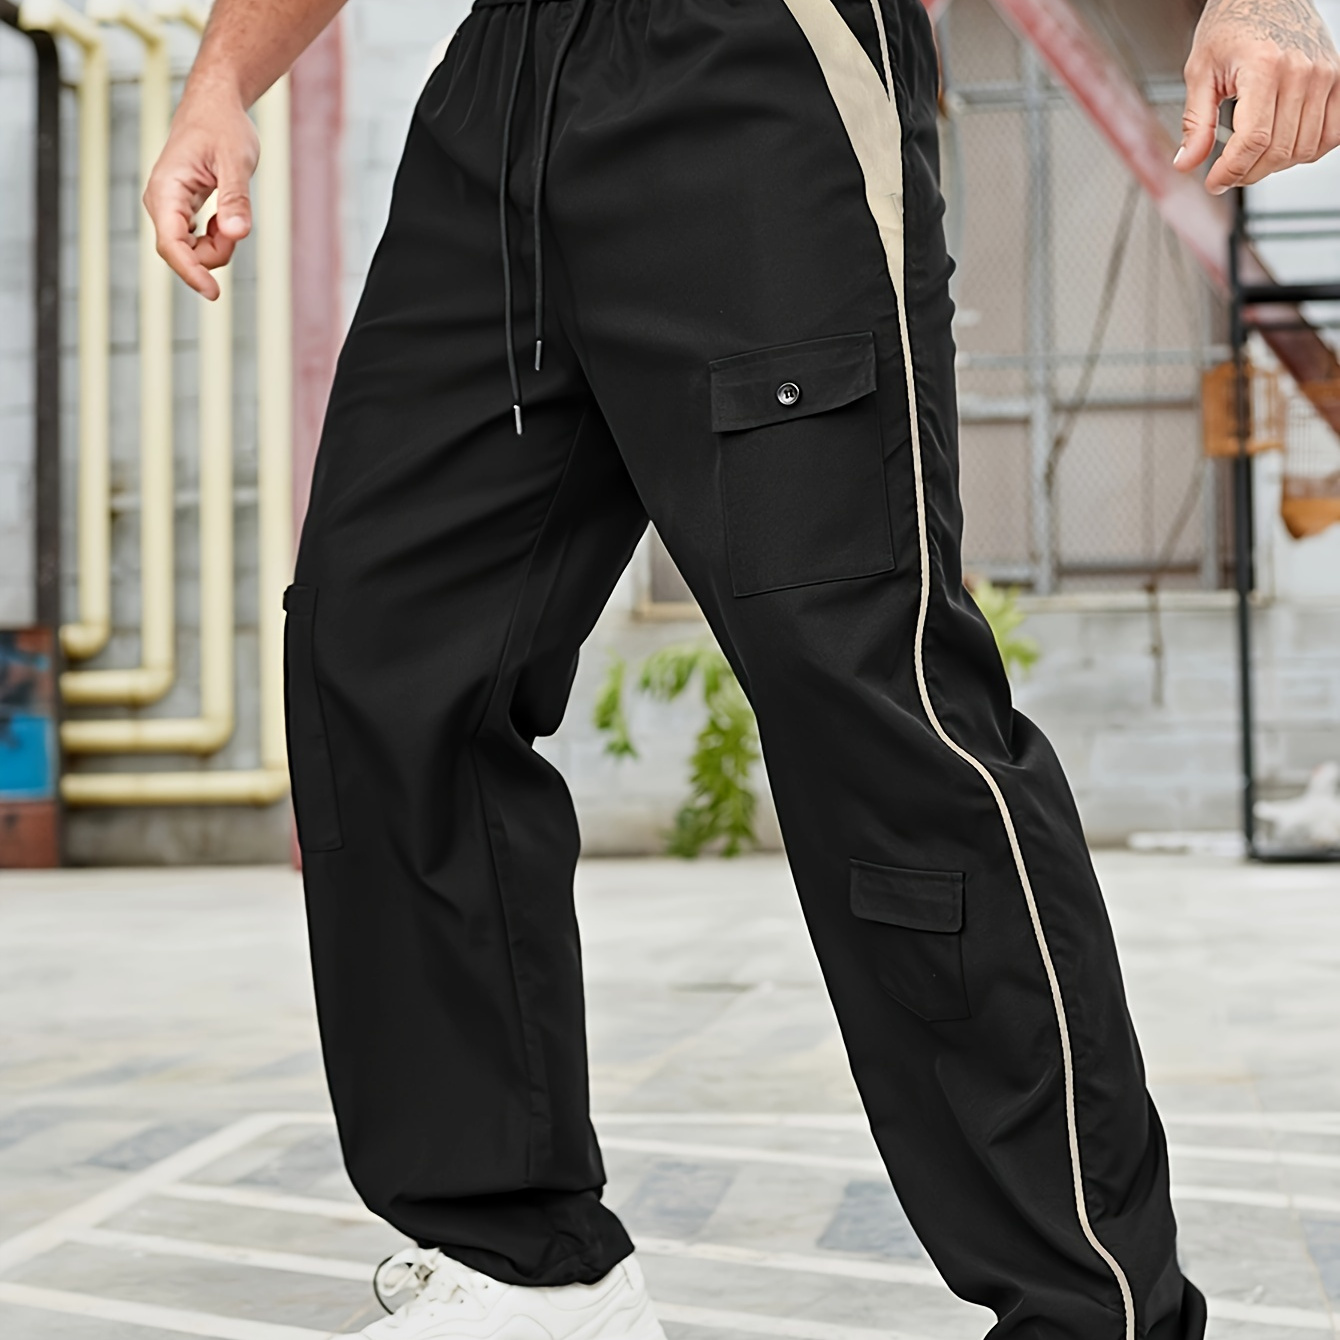 

Chic Color Block Men's Multi-pocket Long Drawstring Cargo Pants For All Seasons Outdoor, Leisure And Street